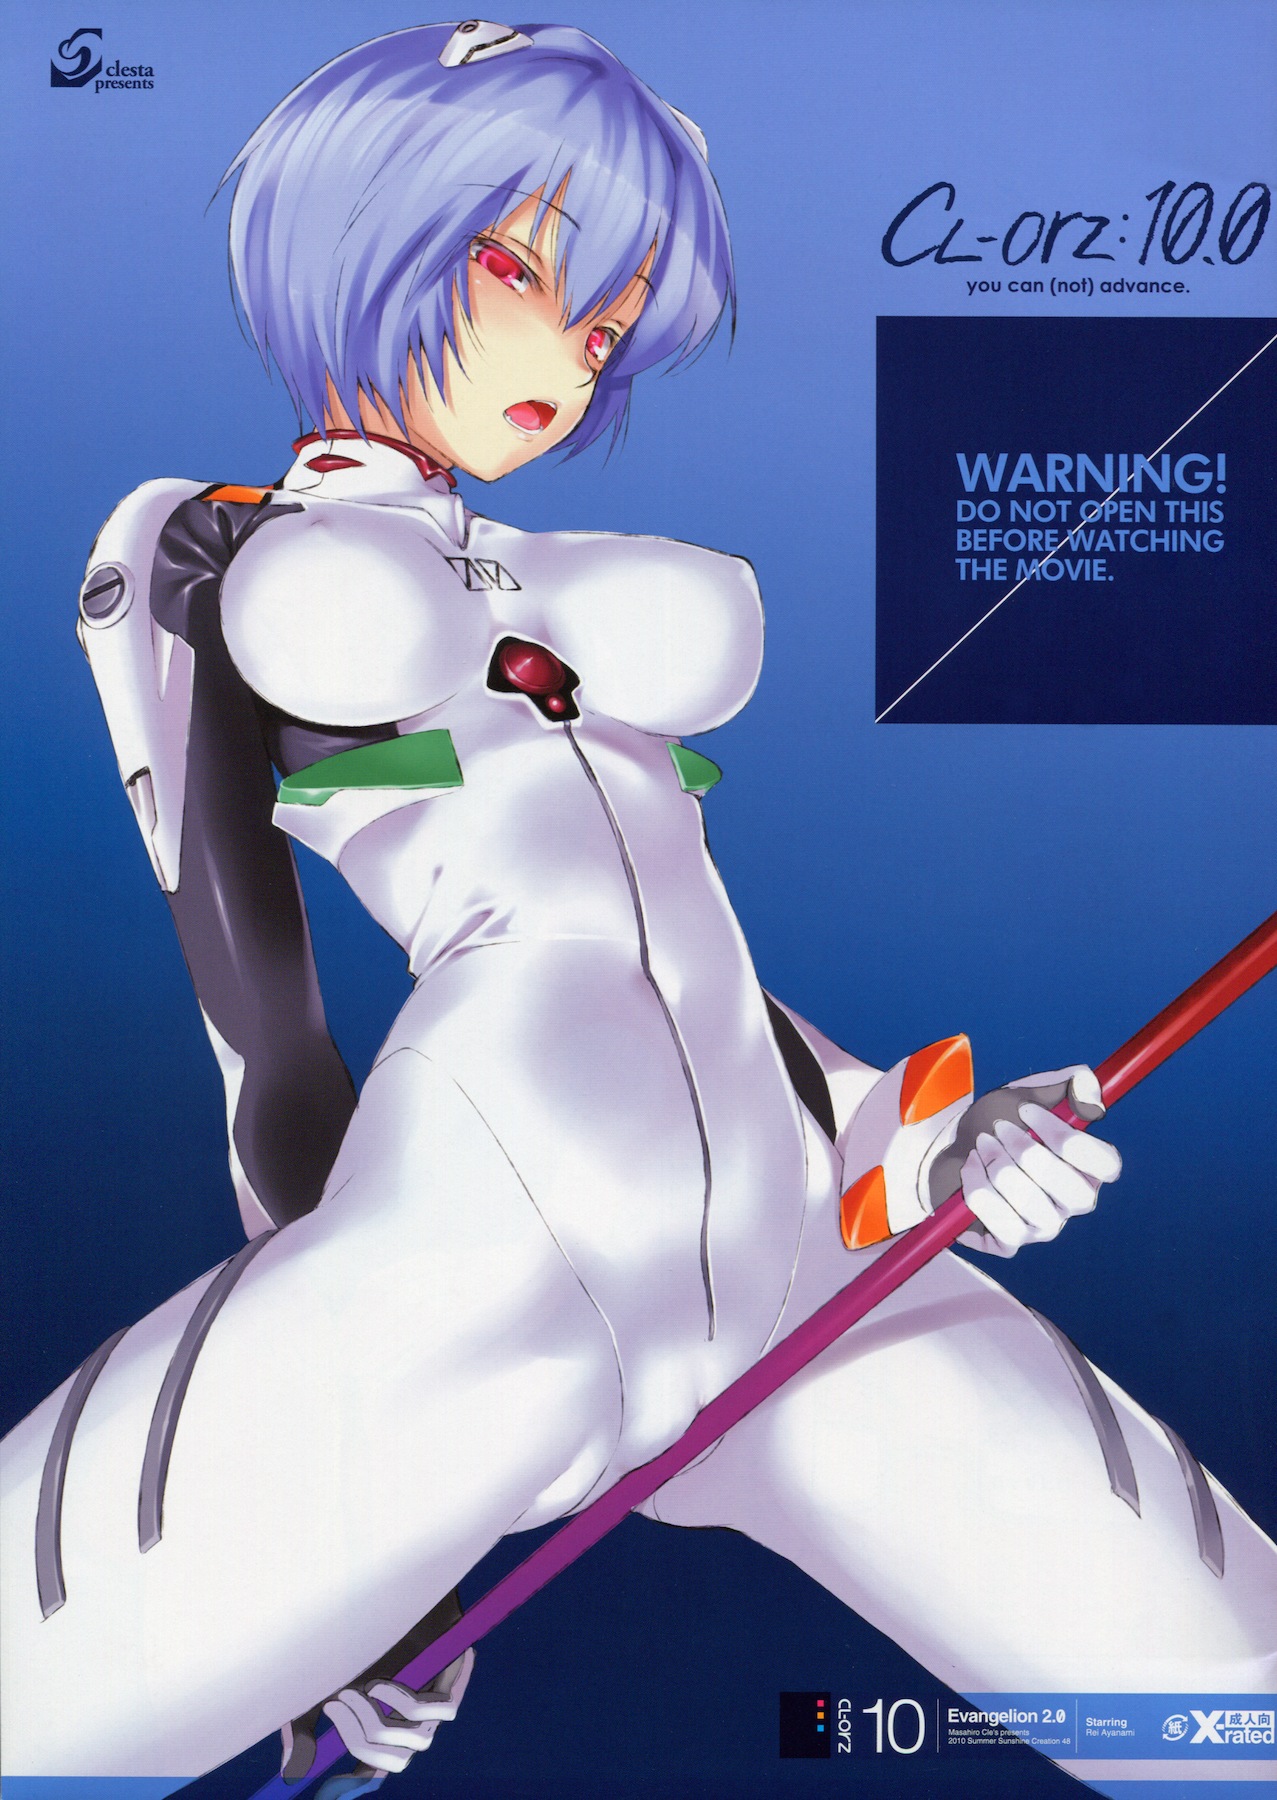 SC48 Clesta Cle Masahiro CL orz10.0 you can not advance Rebuild of Evangelion Decensored00